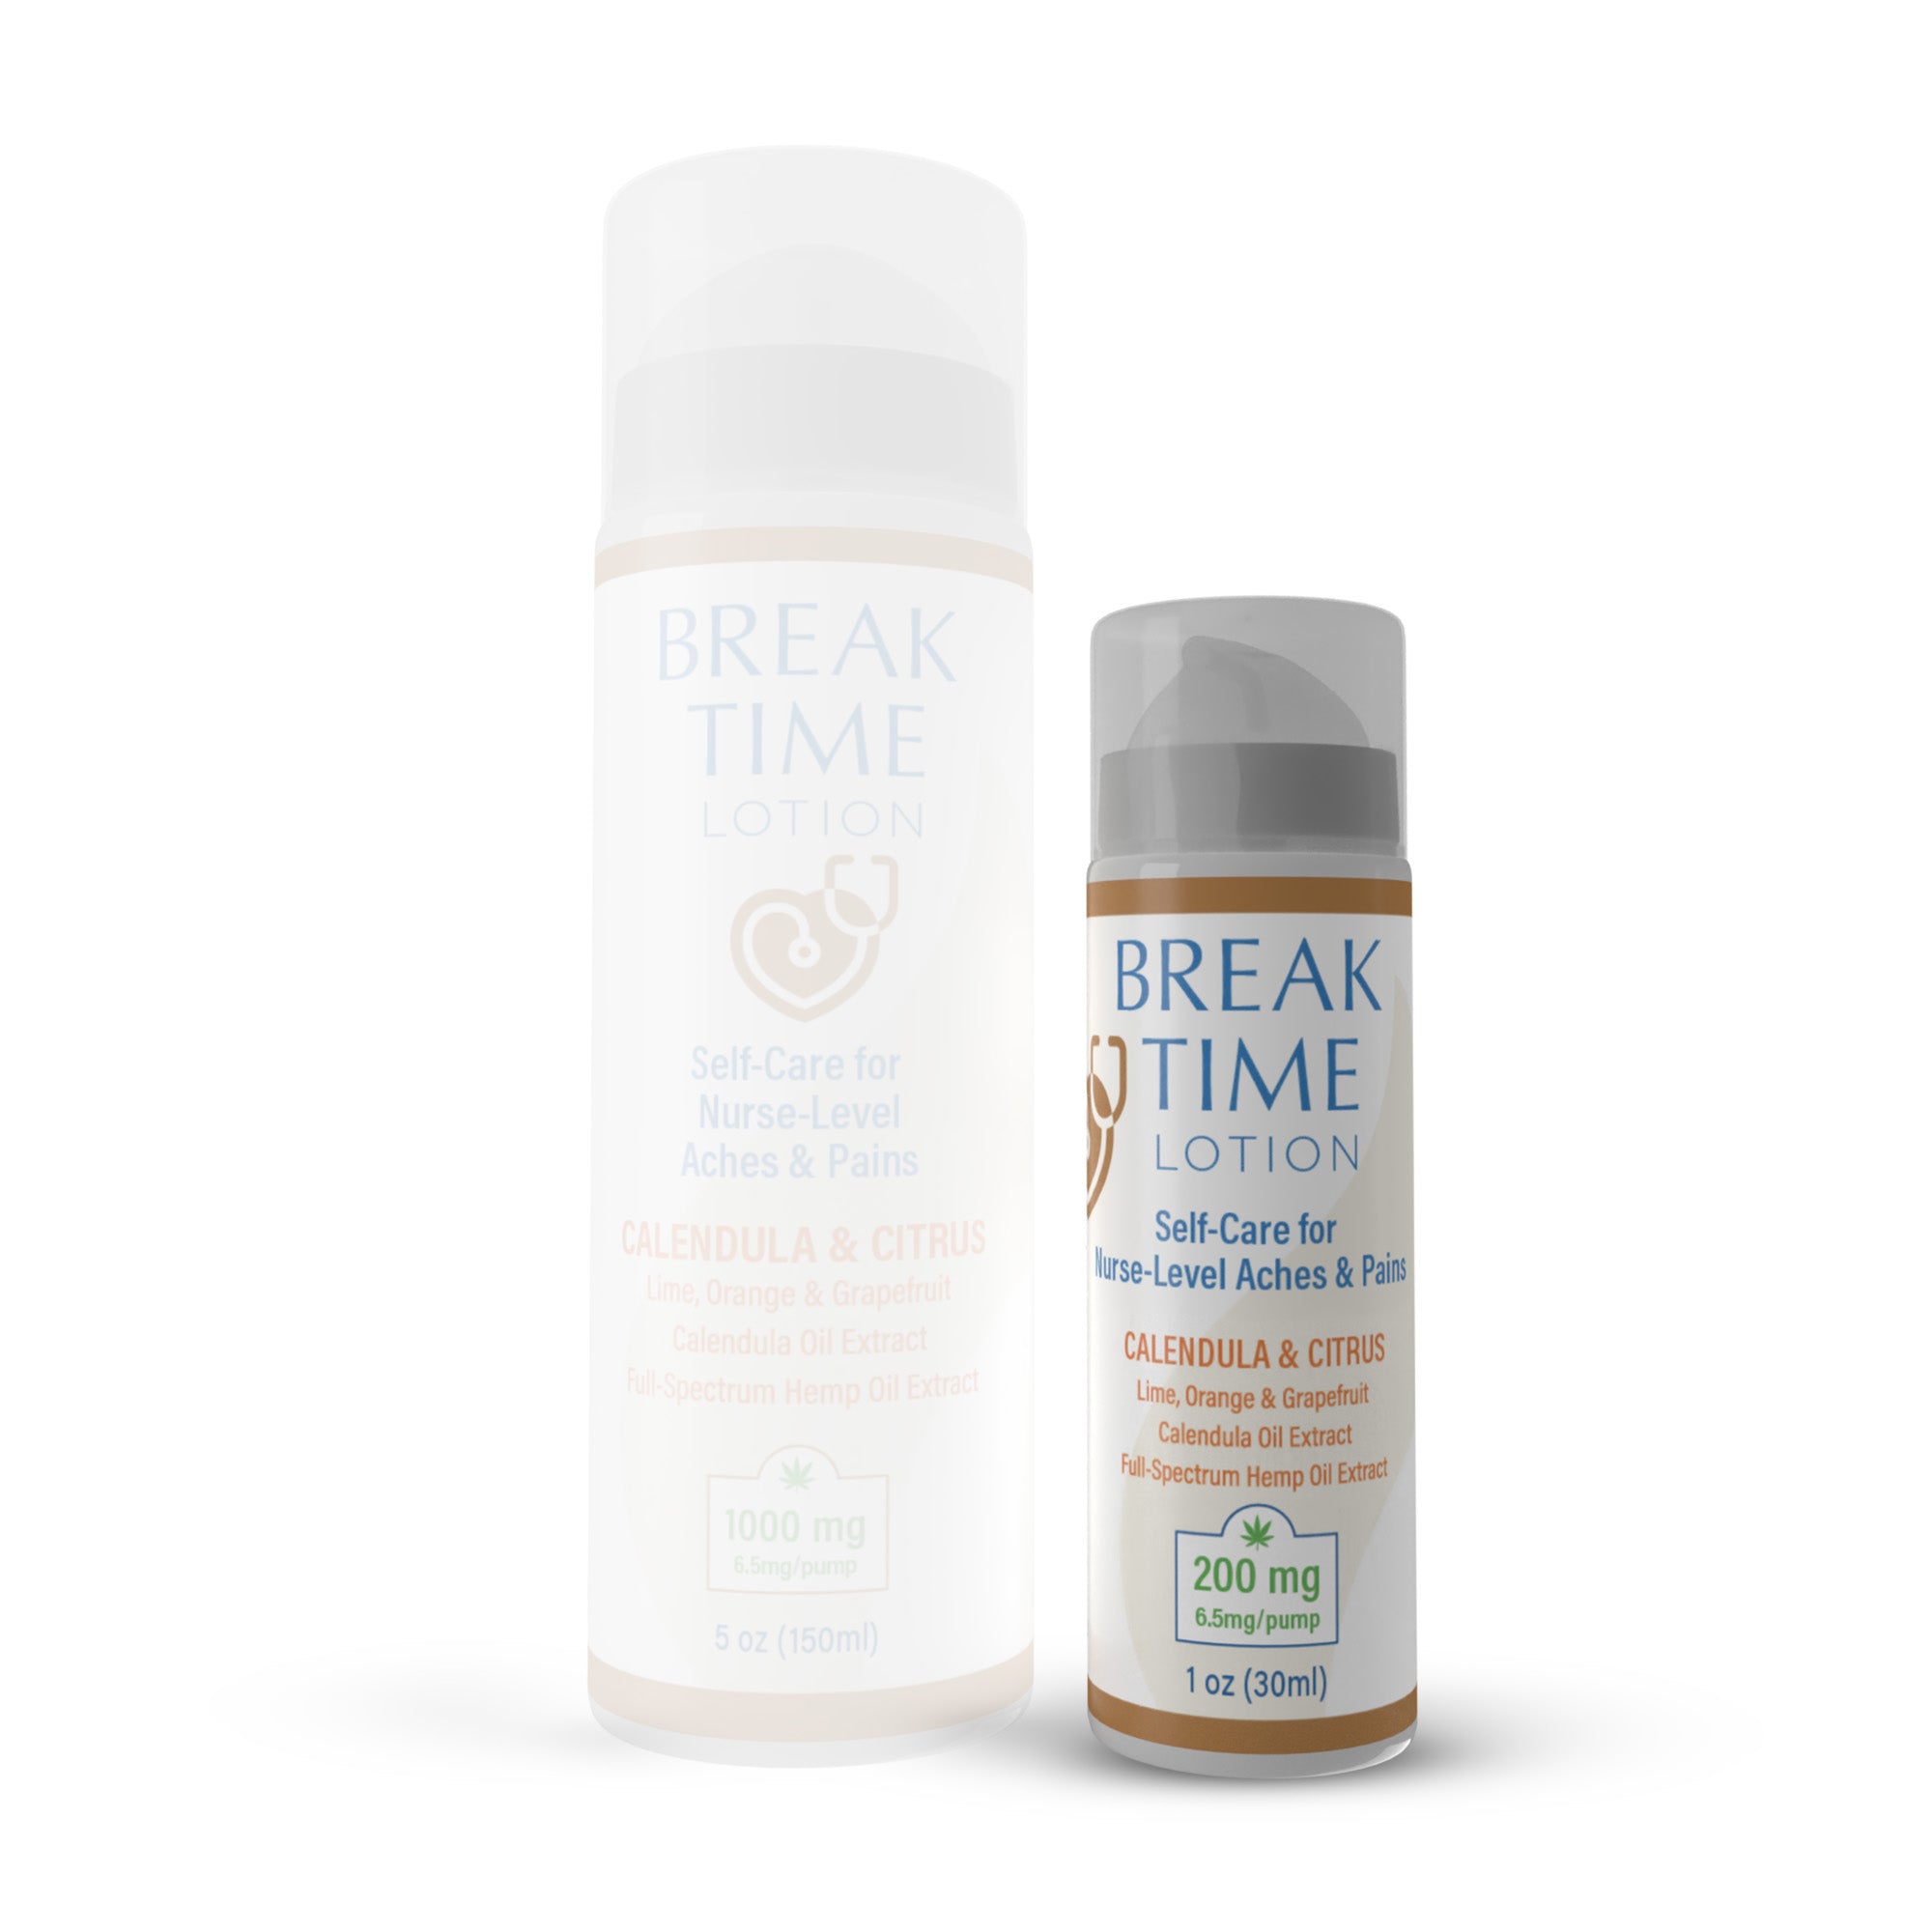 BREAKTIME Lotion for Rekindled Nurse (Travel Size)-You spend your life caring for people.
Around the clock, from loved ones to patients, you give 110% of yourself to provide comfort and healing to others.
When you’re-Cedar Meadow Farm